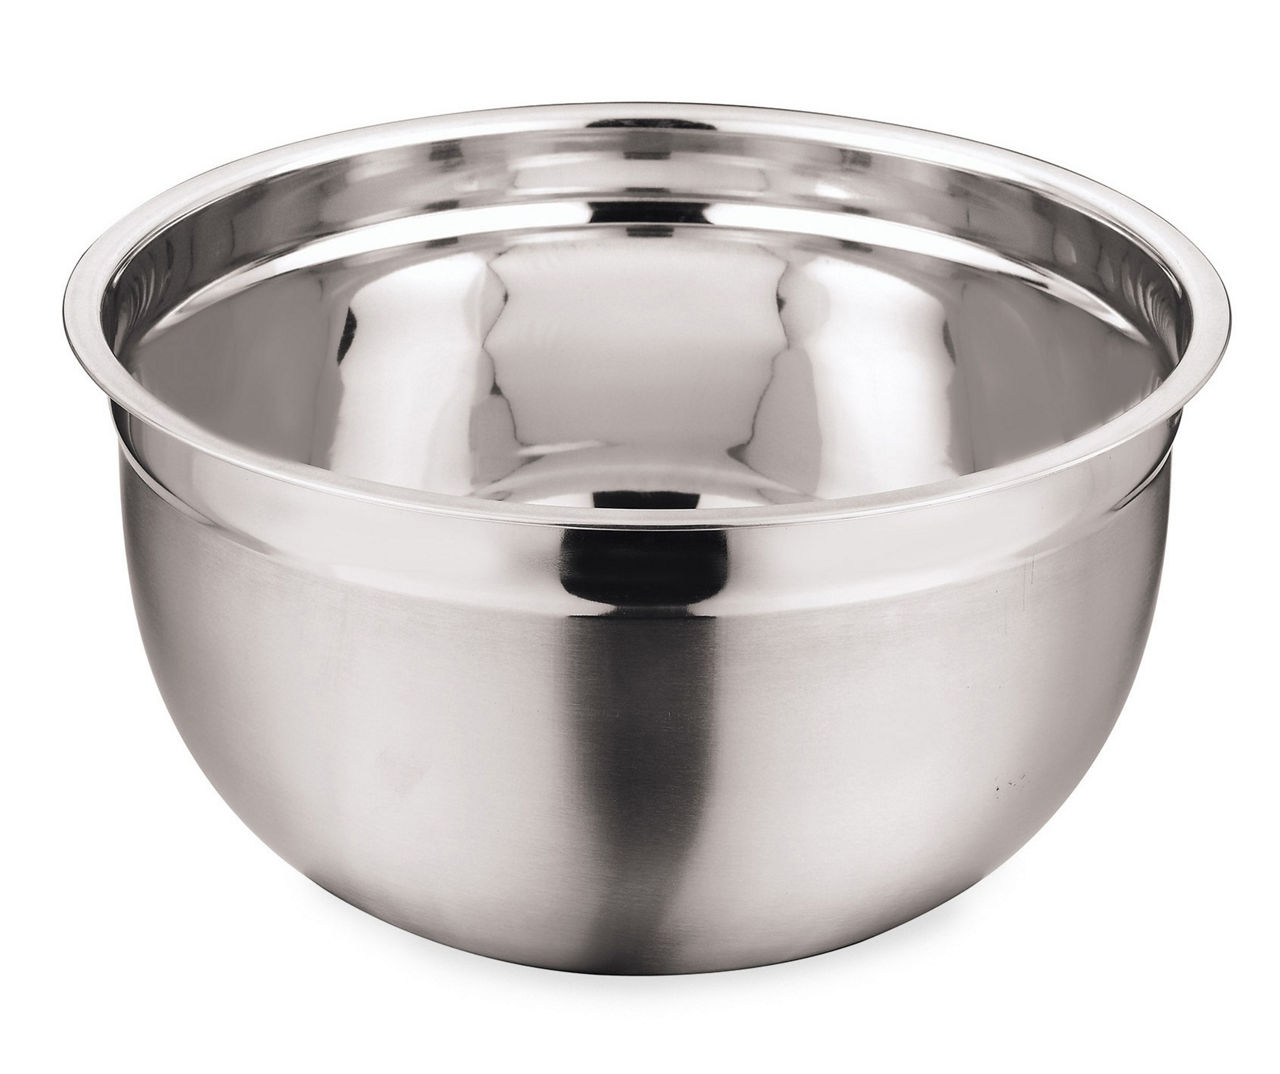 Real Living Stainless Steel 9-Quart Mixing Bowl